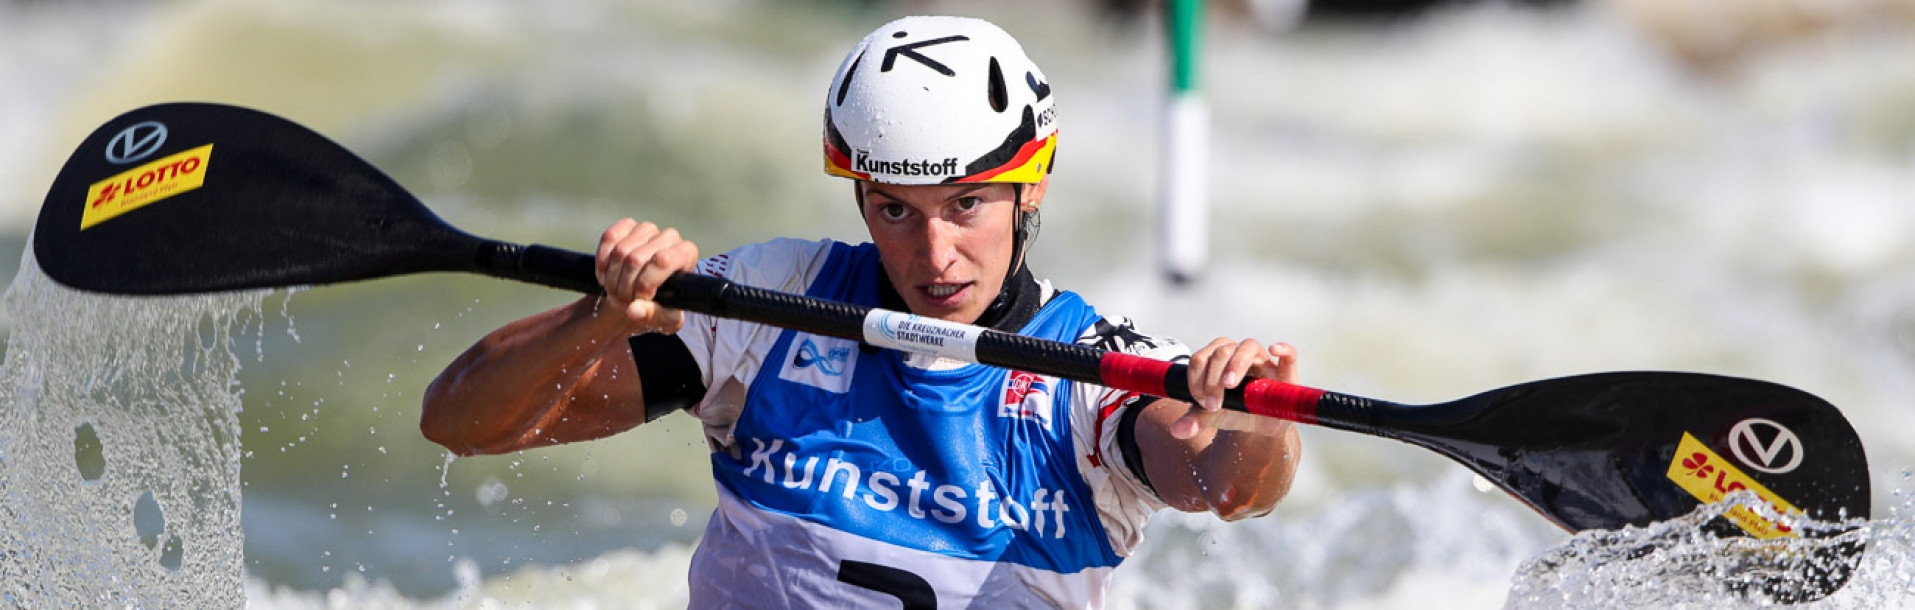 Funk and Slafkovský triumph as Olympic fever hits ICF Canoe Slalom World Cup